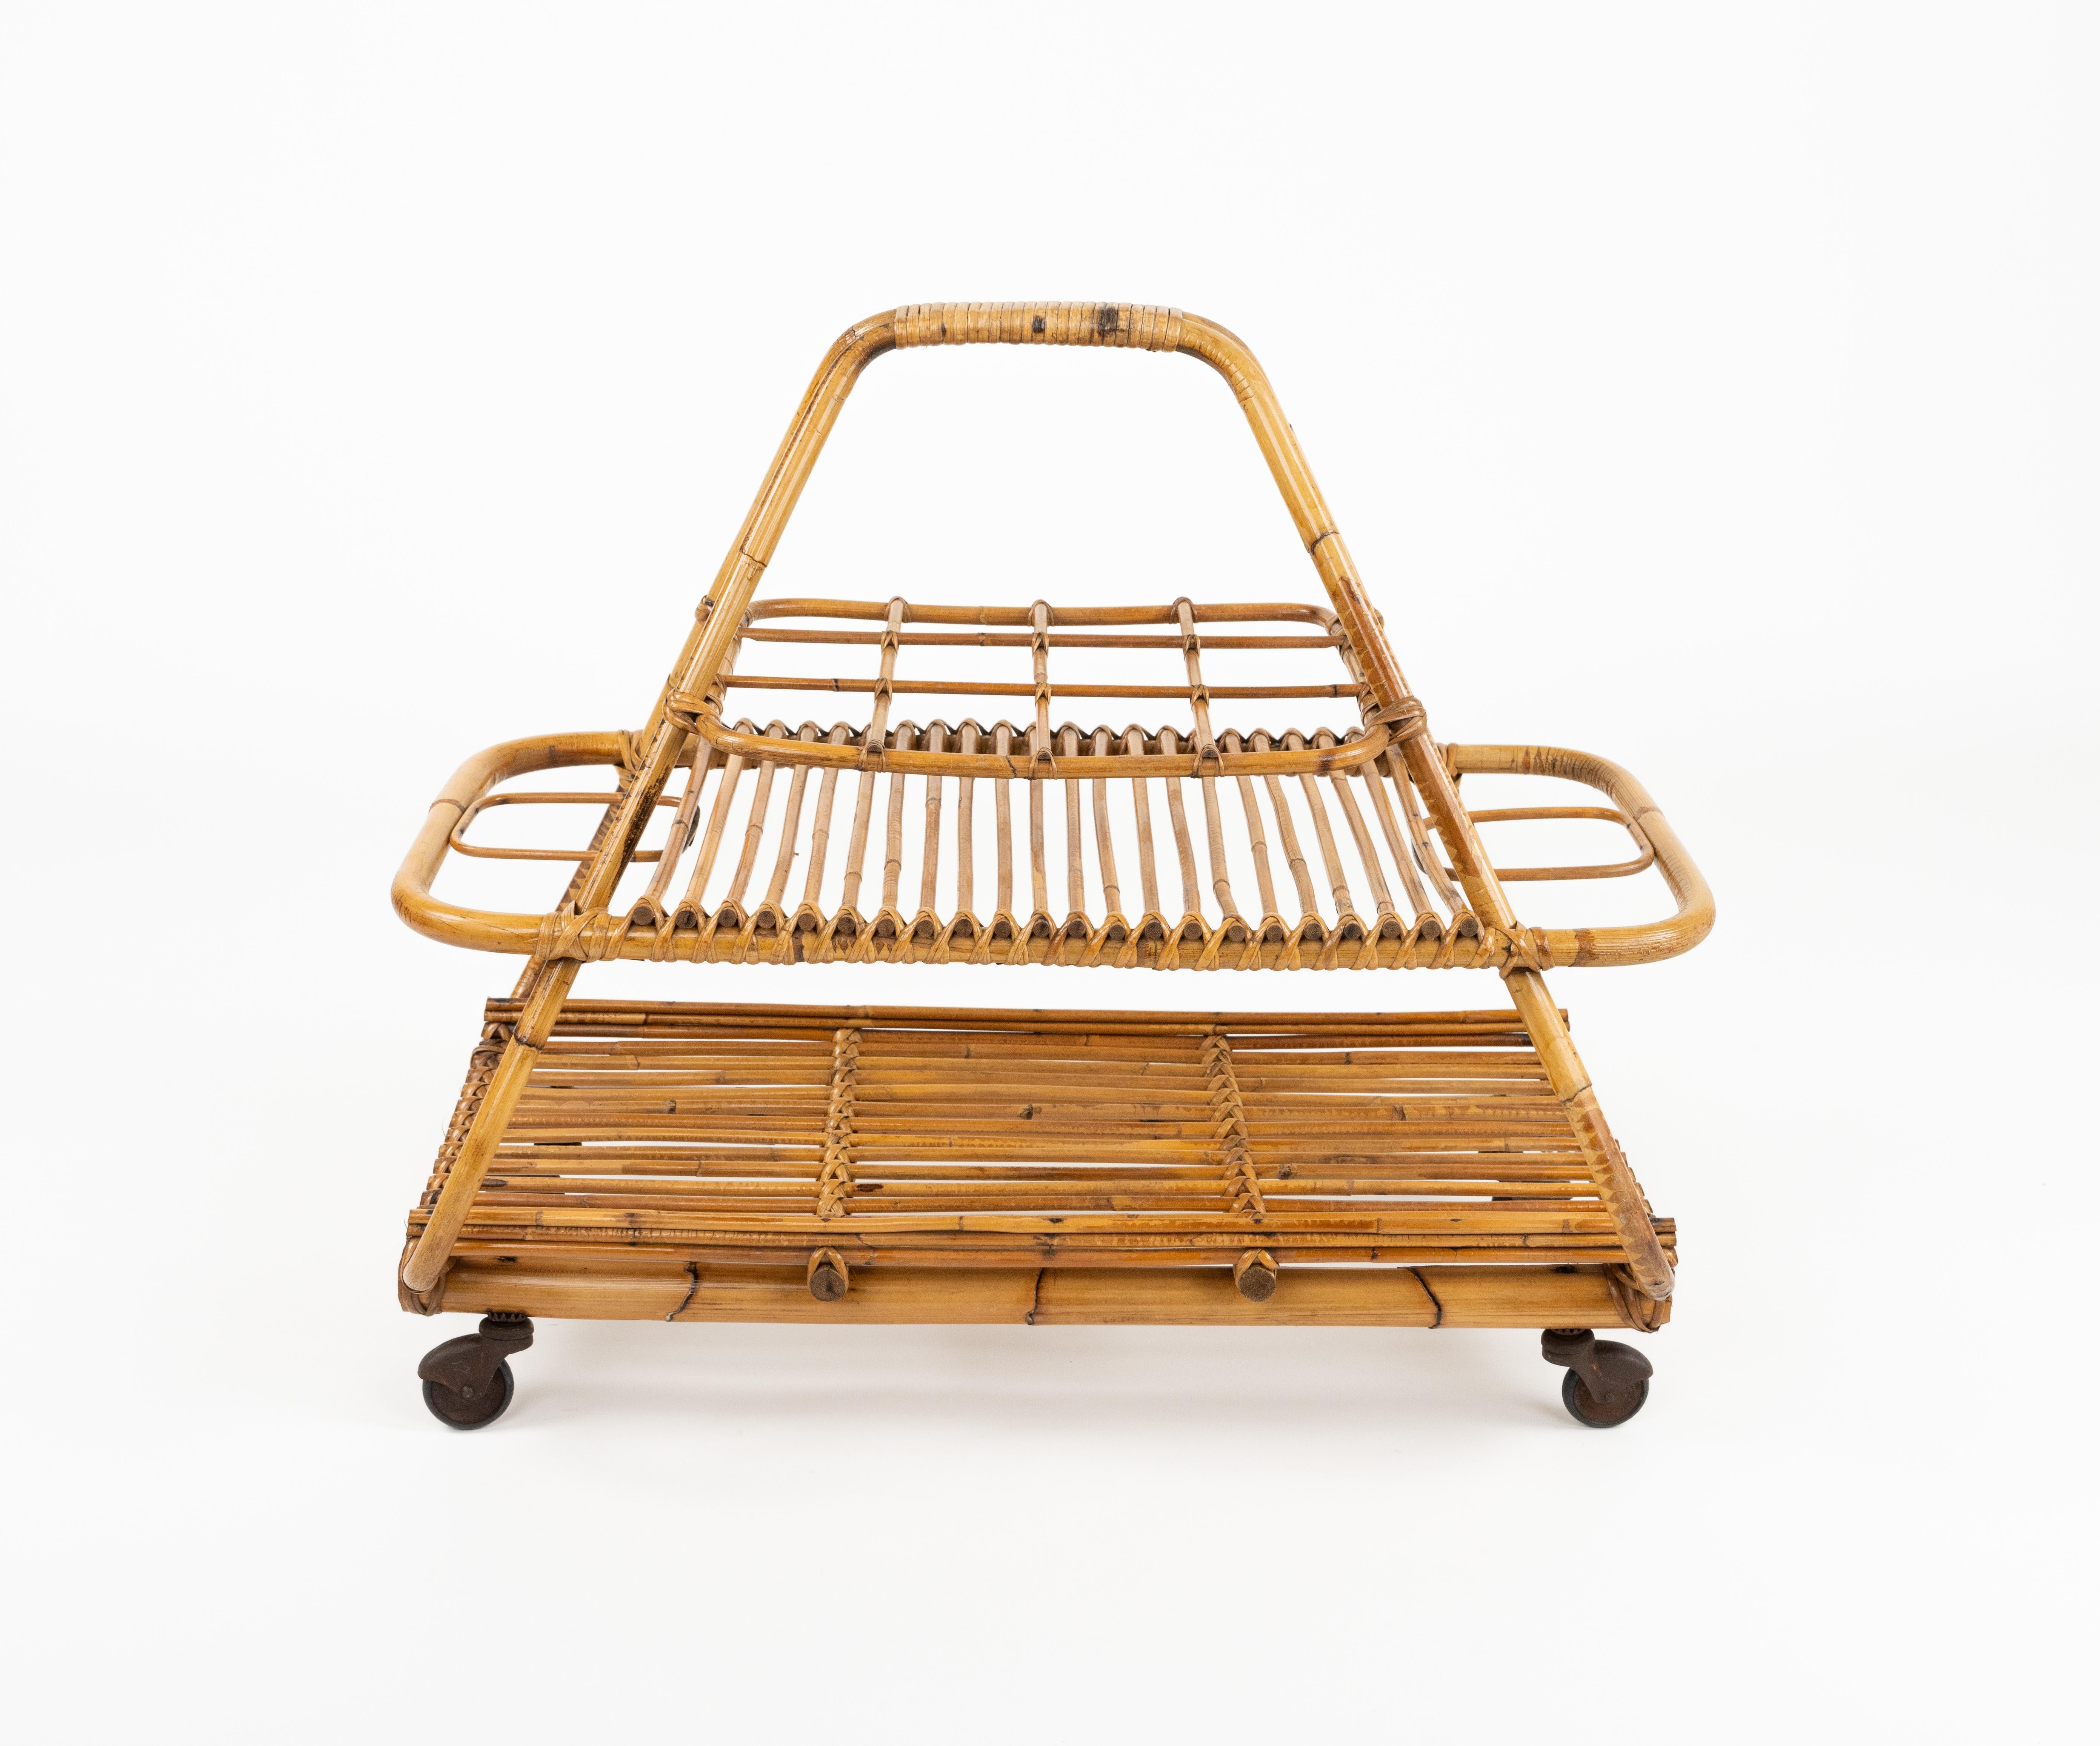 Midcentury amazing serving bar cart with bottle holder and glass holder with a curved handle for lifting in bamboo and rattan.

Made in Italy in the 1960s.